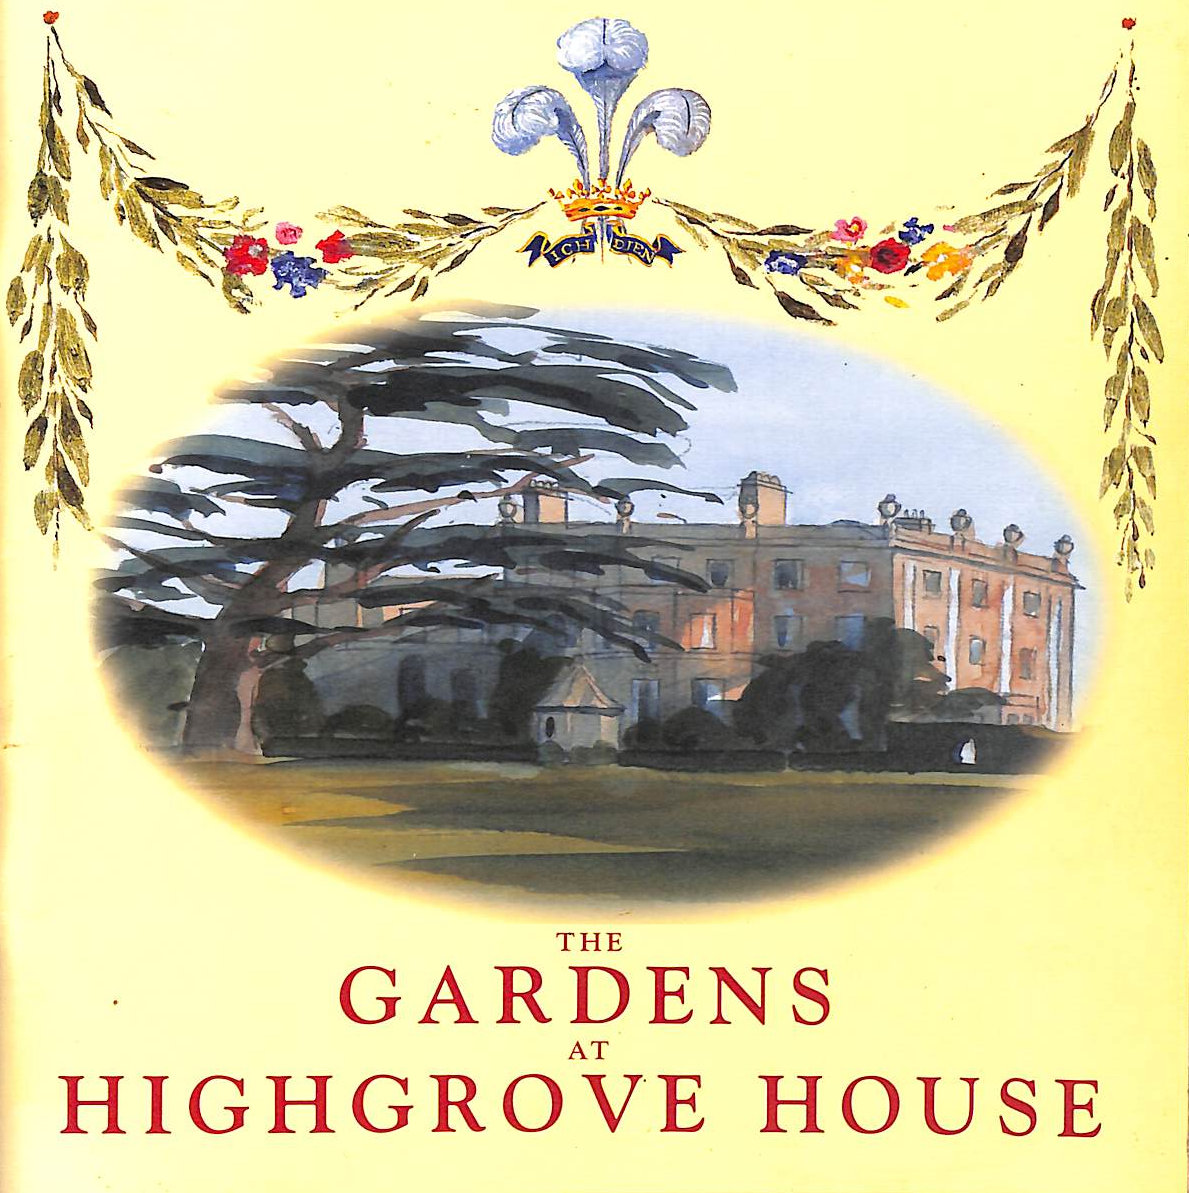 UNKNOWN. INTRODUCTION BY THE PRINCE OF WALES, NOW KING CHARLES III - The Gardens at Highgrove House